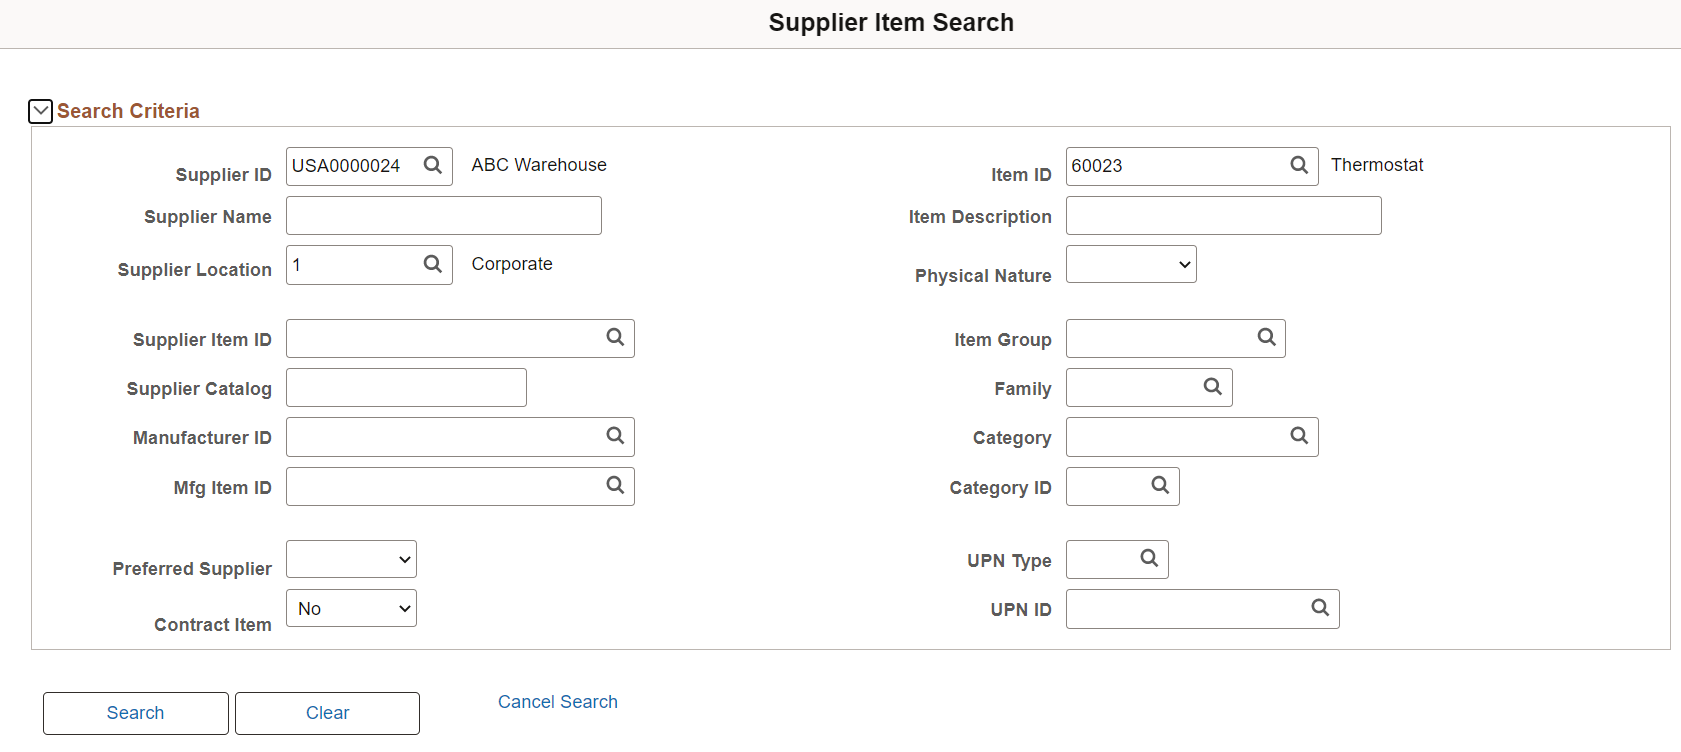 Supplier Item Search page (1 of 2)